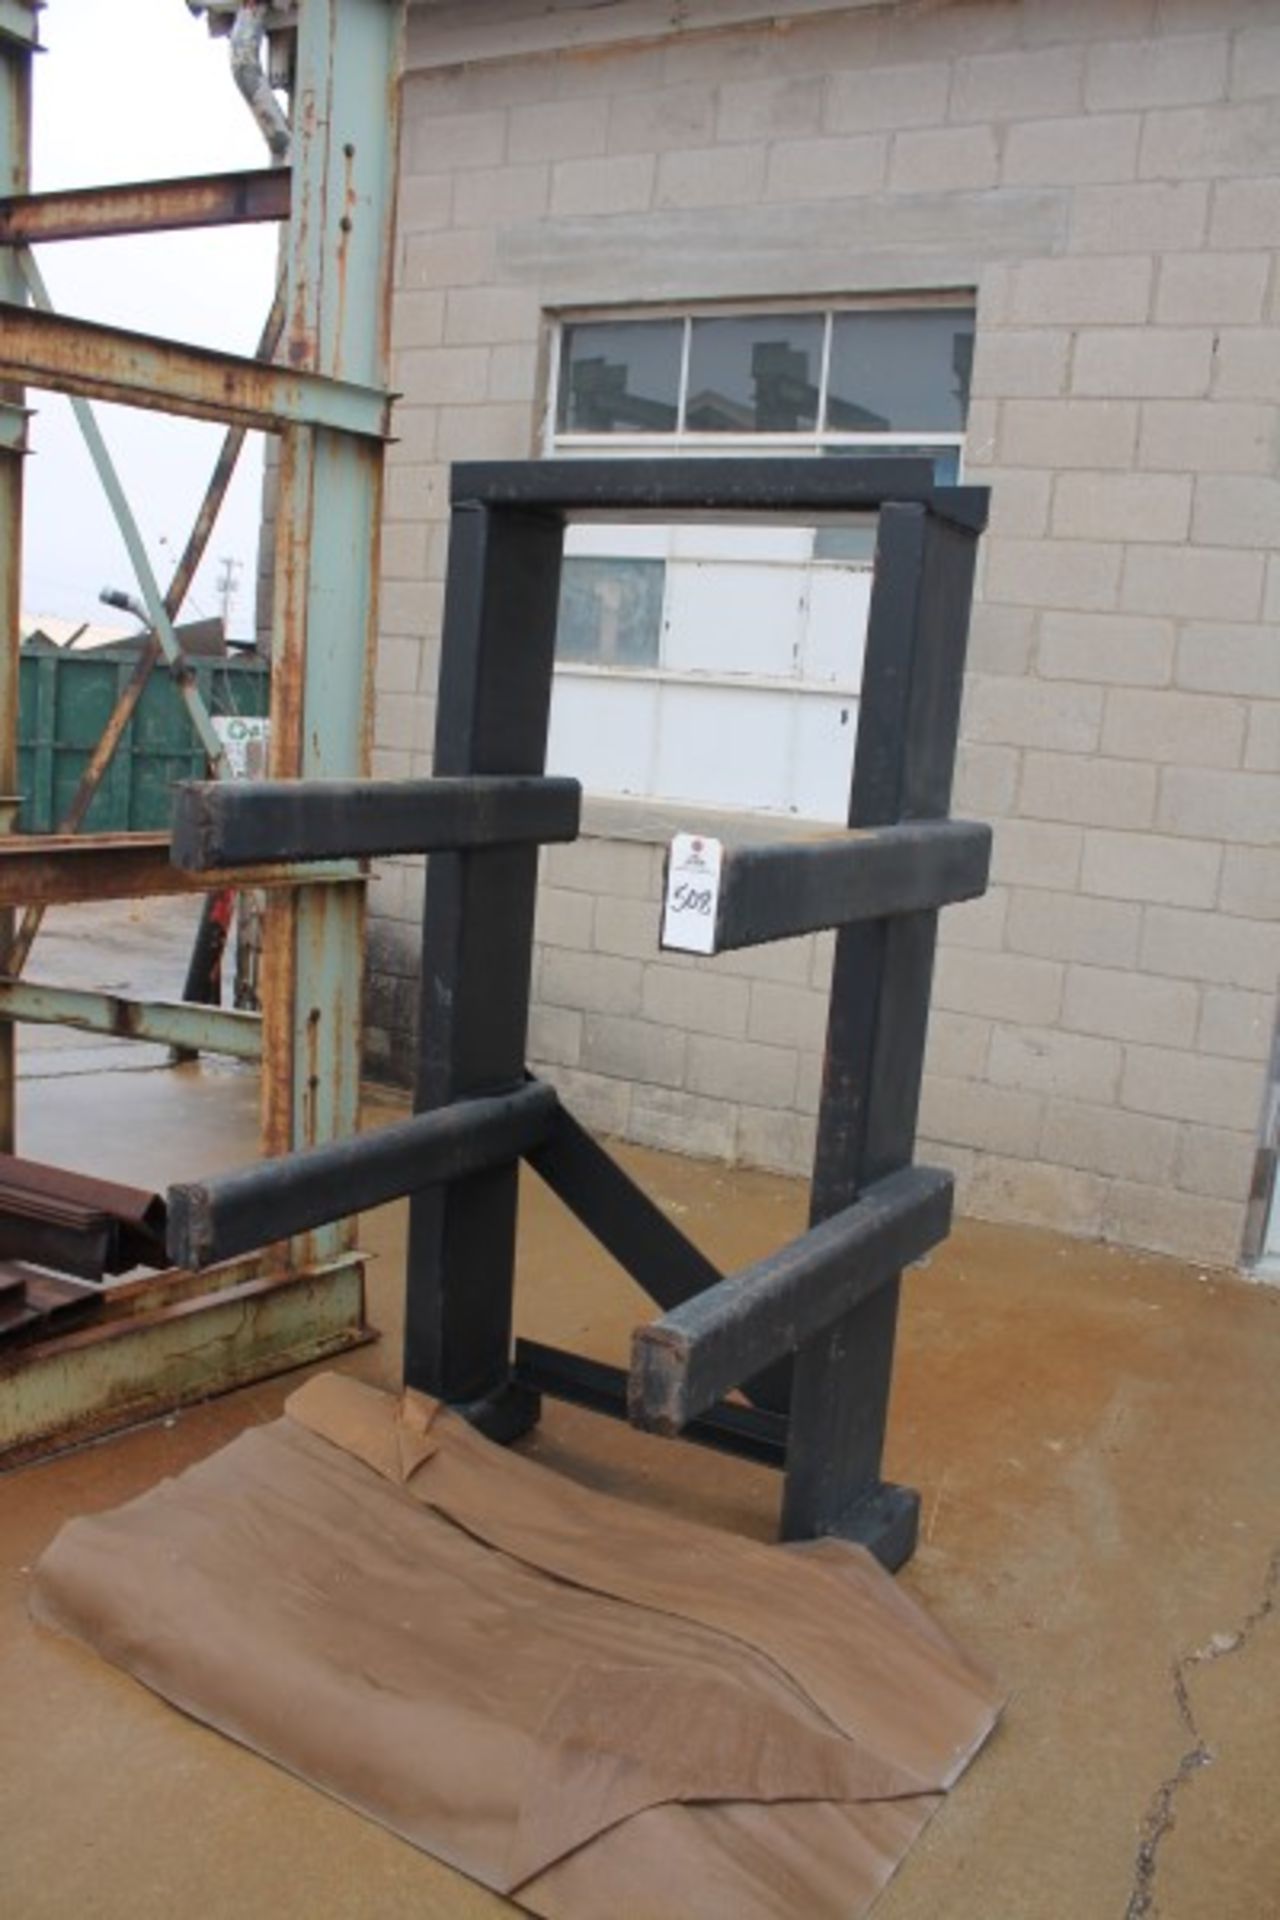 Cantilever Rack - Image 2 of 2